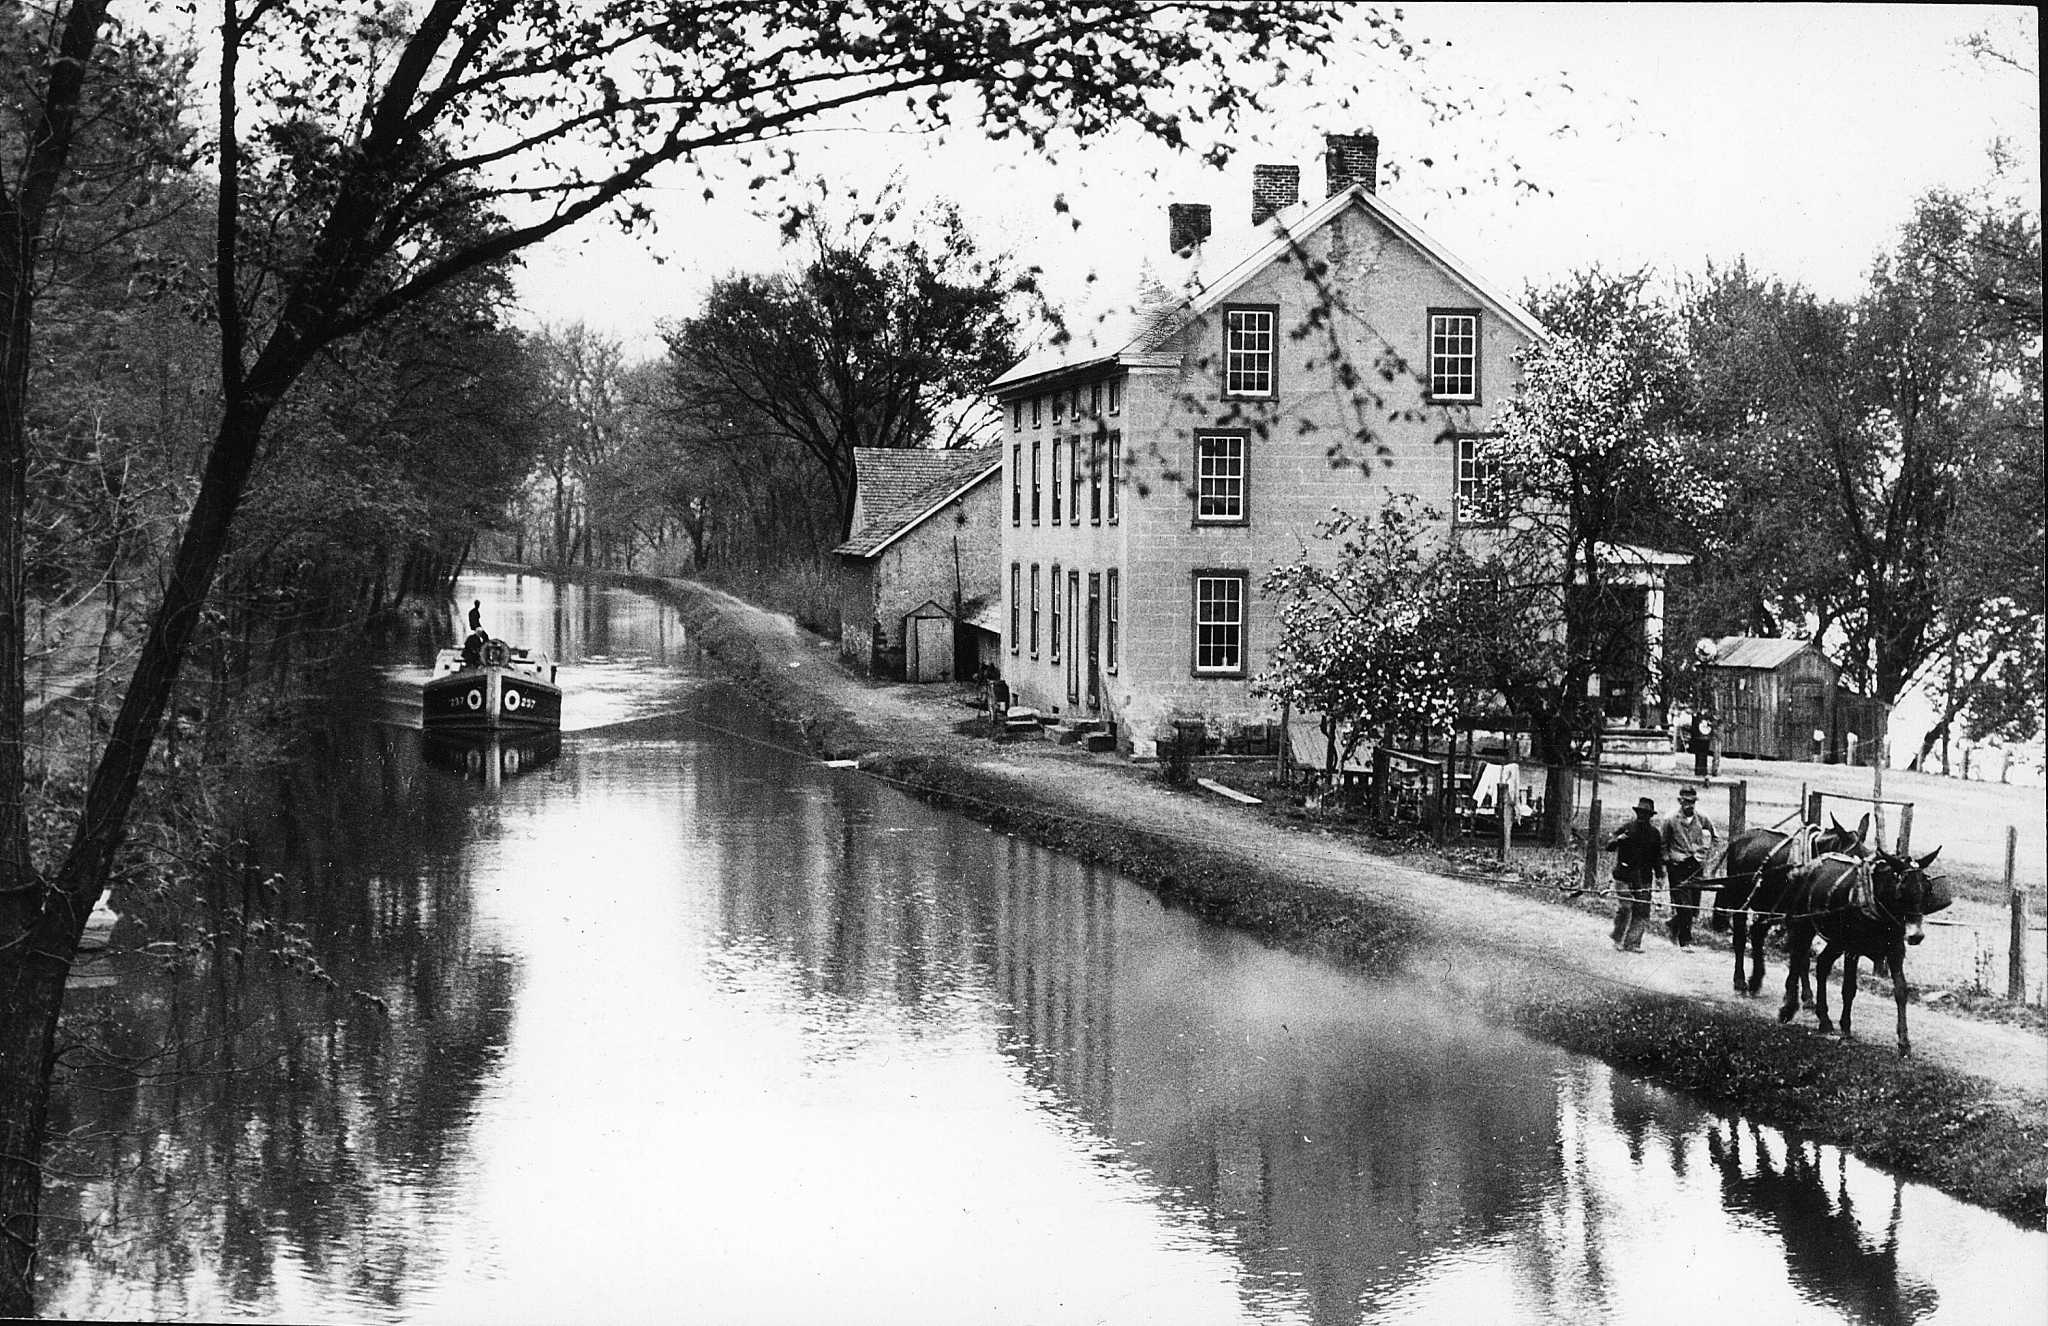 How a Canal Built a Community: Captain James Brown is on the left driving a mule team on the Delaware Canal